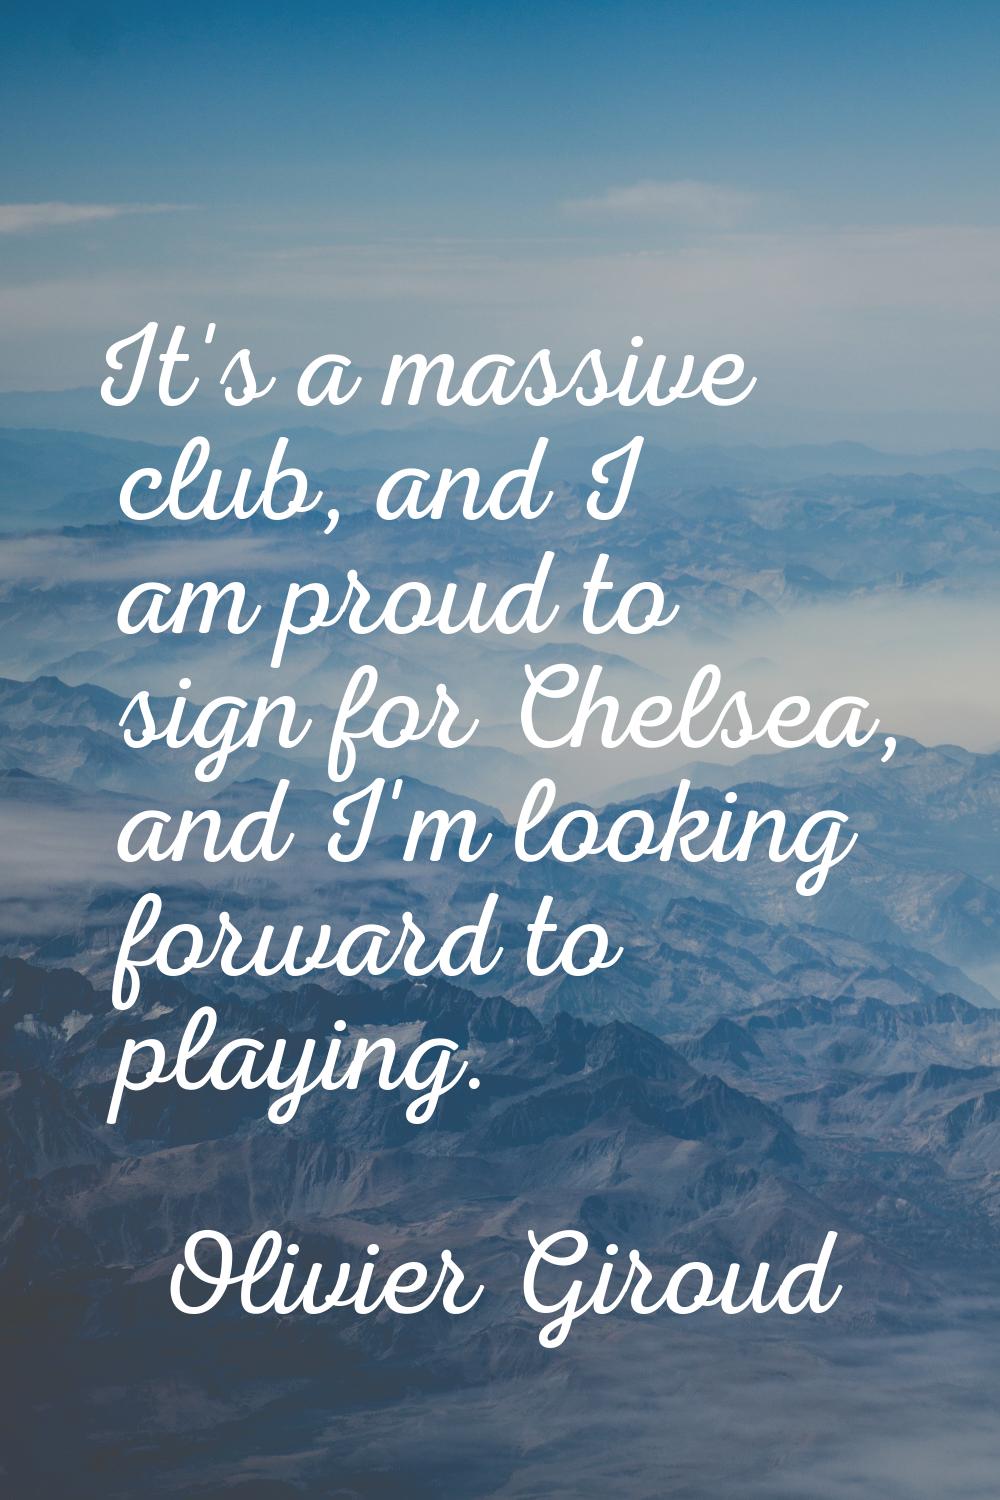 It's a massive club, and I am proud to sign for Chelsea, and I'm looking forward to playing.